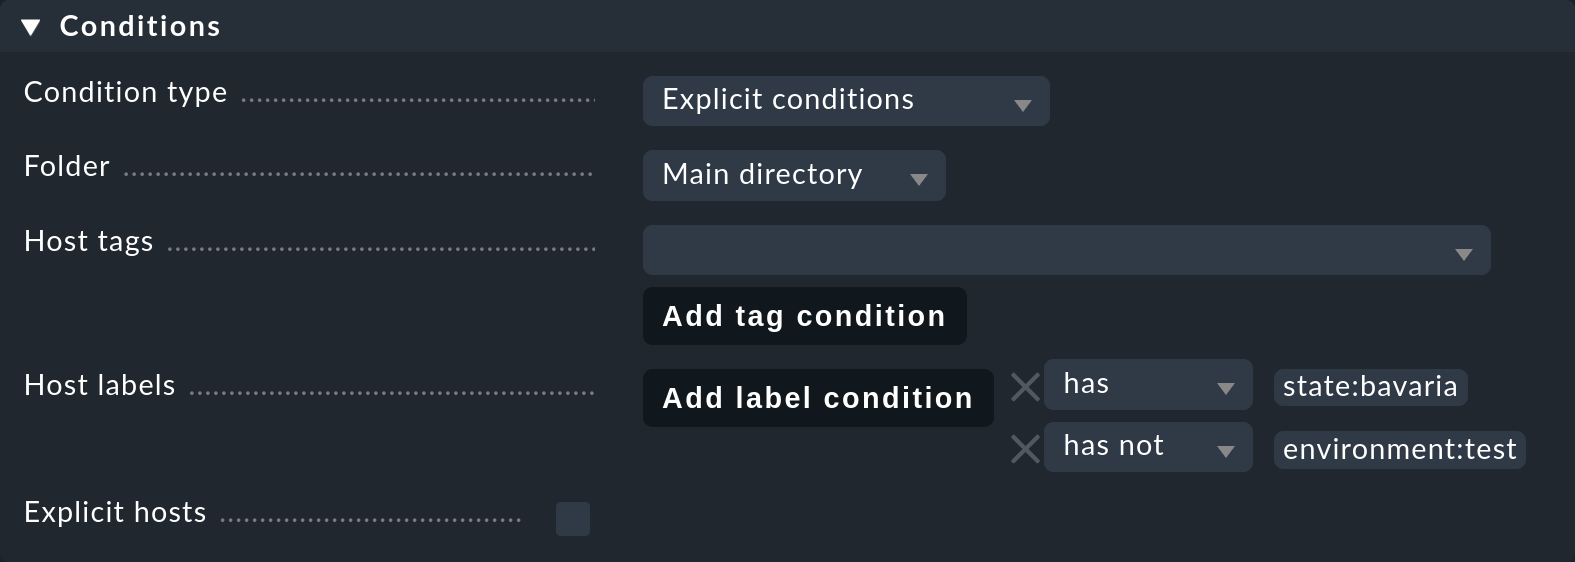 Dialog for defining conditions with labels.